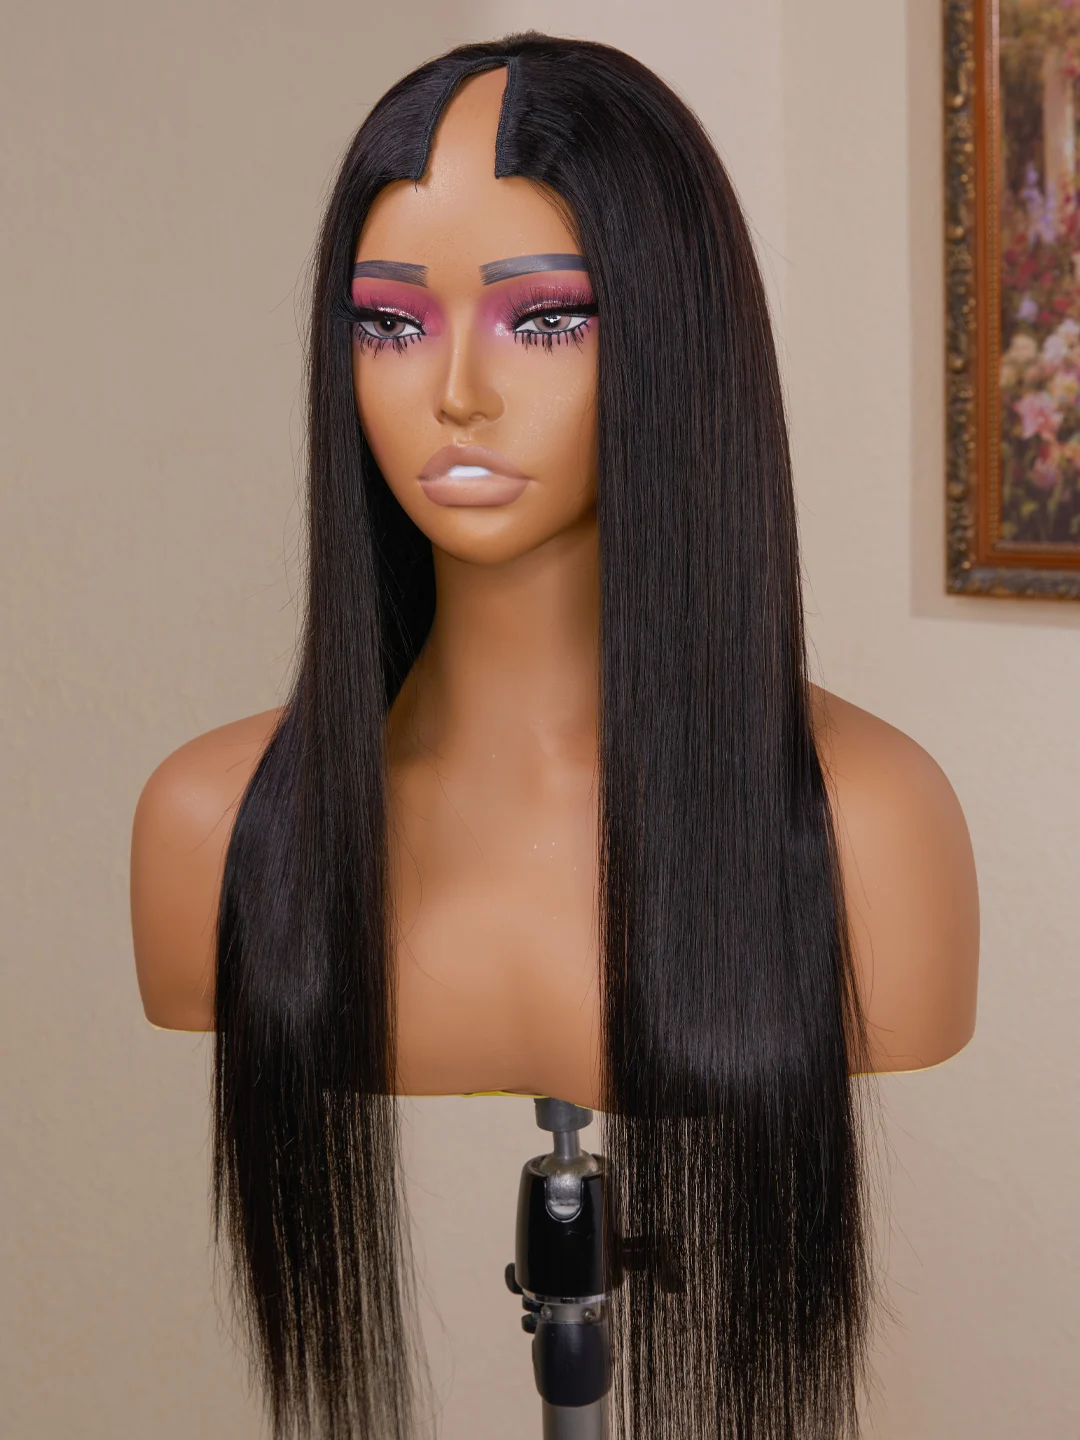 24 inch Long Black U Part Wig European Remy Human Hair Silk Straight Wigs Glueless Jewish Natural Color Soft Wig For Black Women